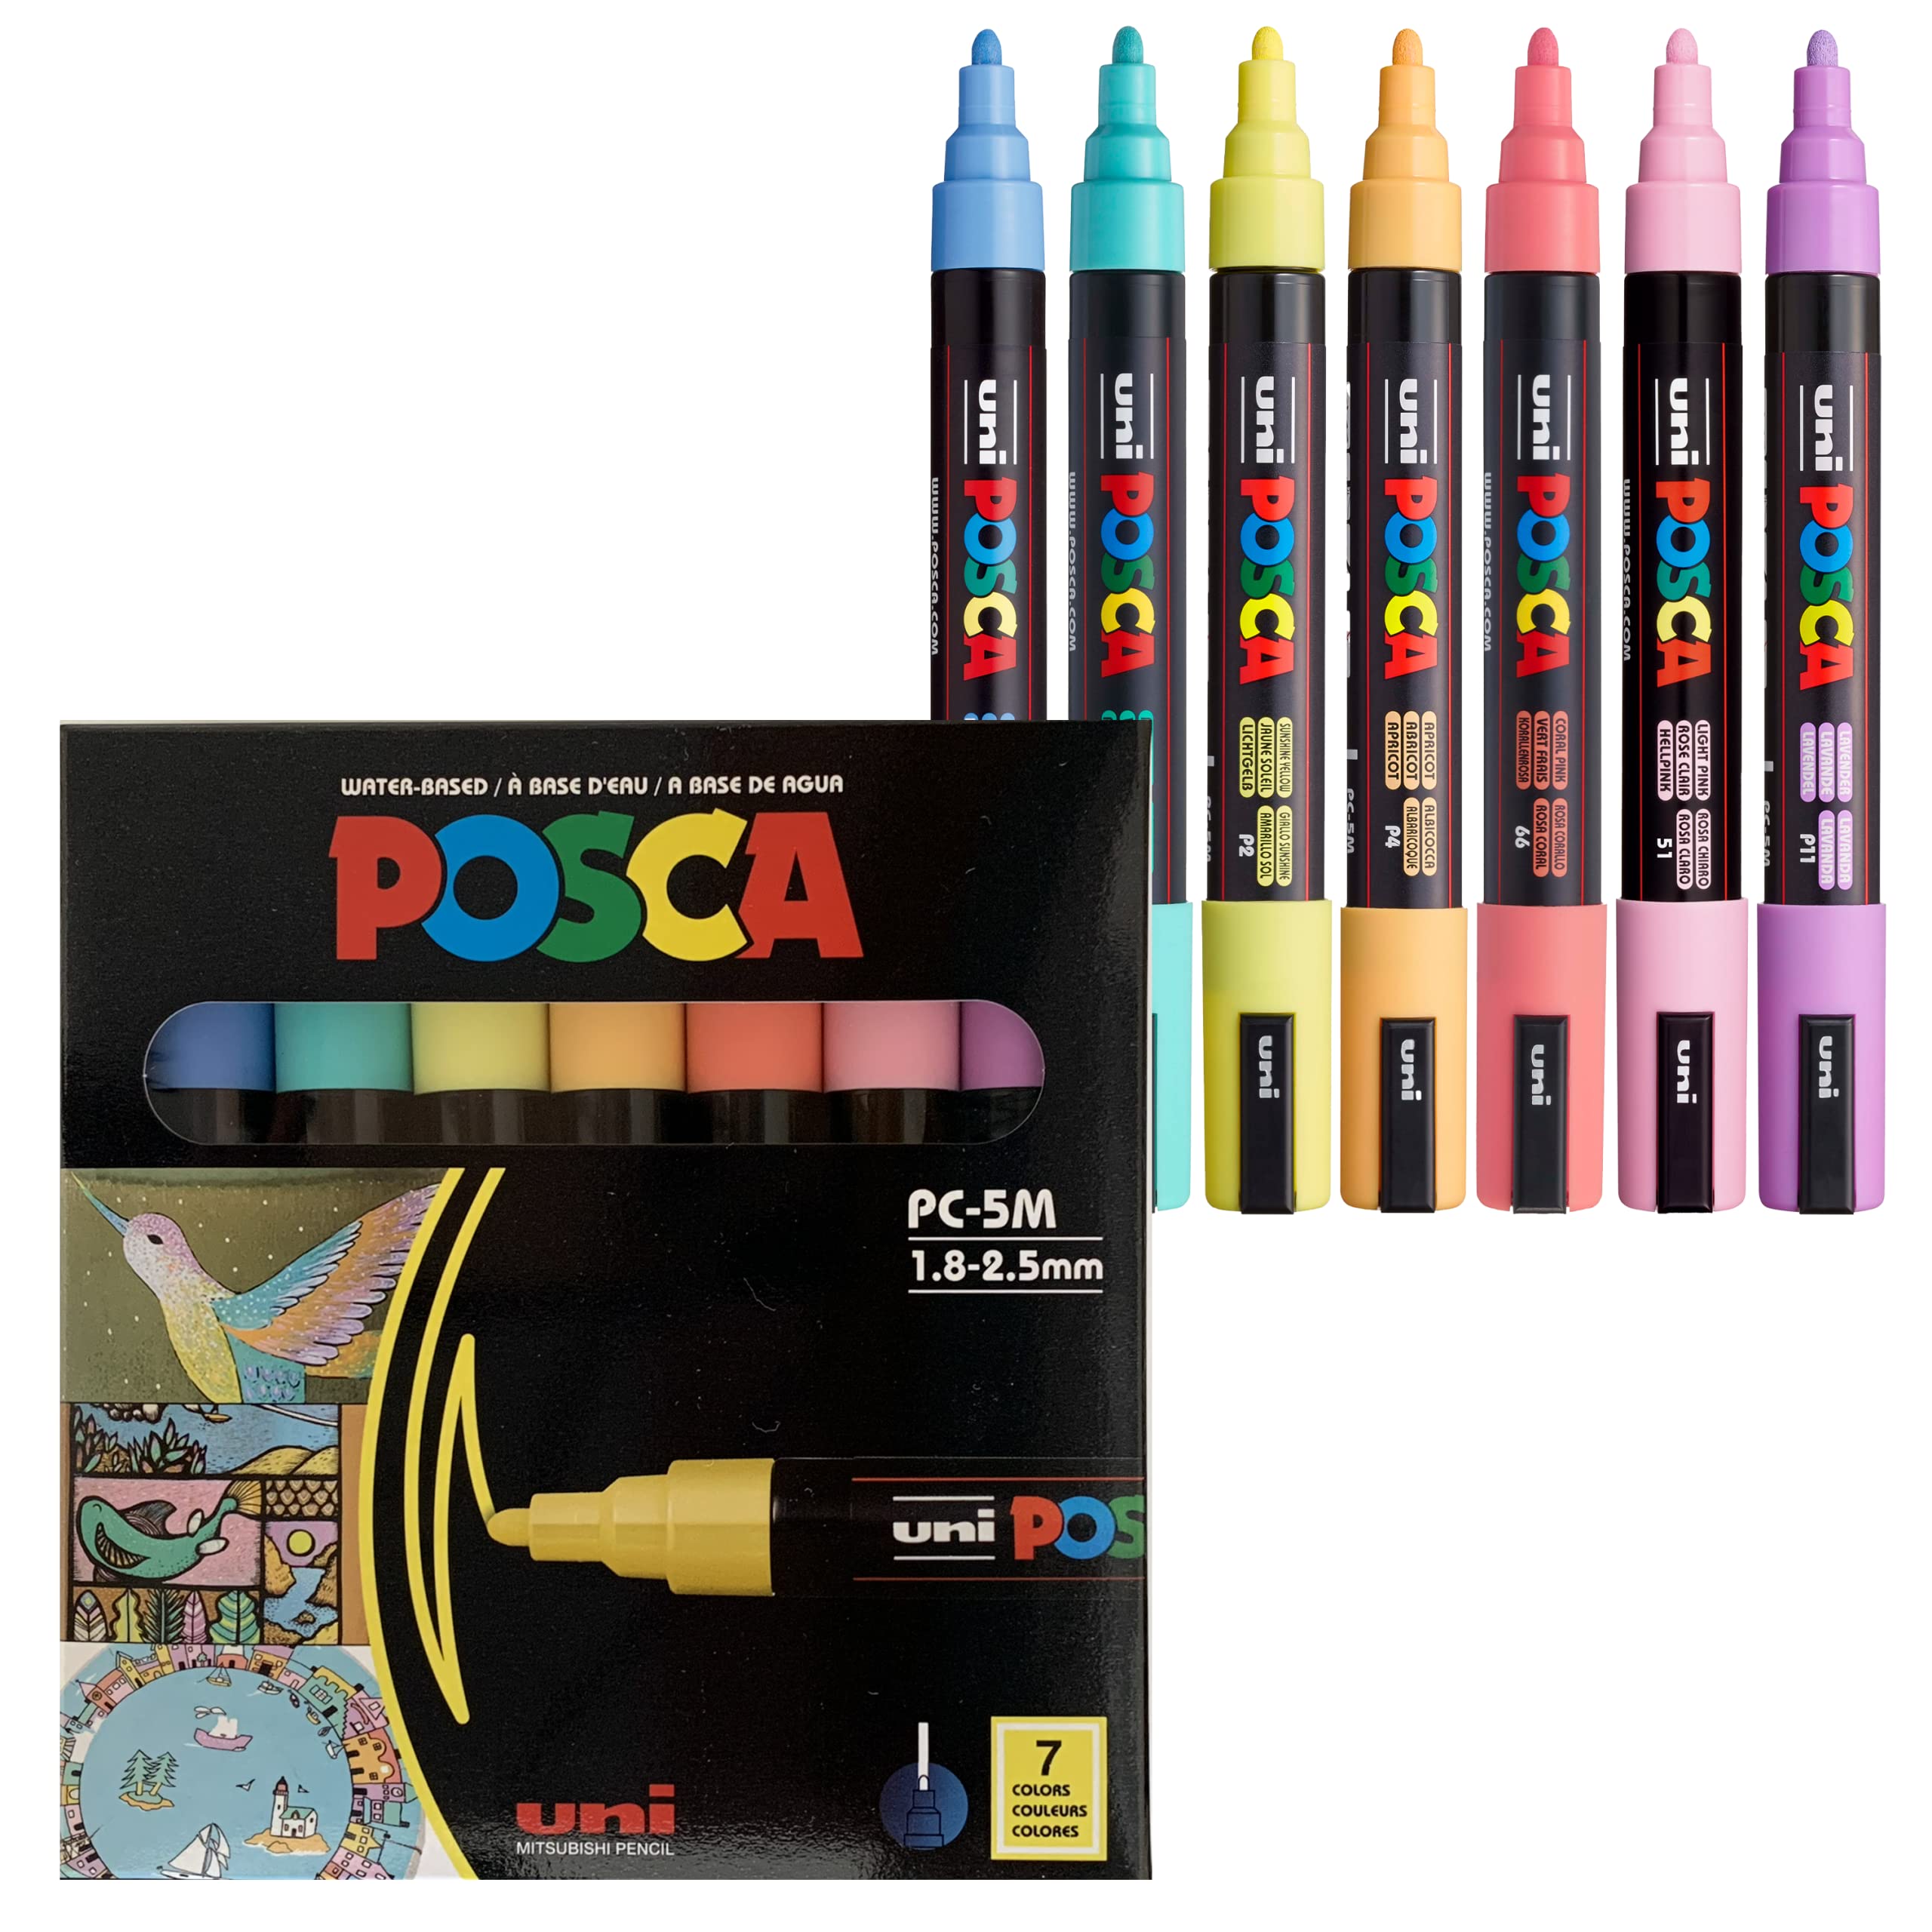 7 Pastel Posca Paint Markers, 5M Medium Posca Markers with Reversible Tips, Posca  Marker Set of Acrylic Paint Pens, Posca Pens for Art Supplies, Fabric  Paint, …